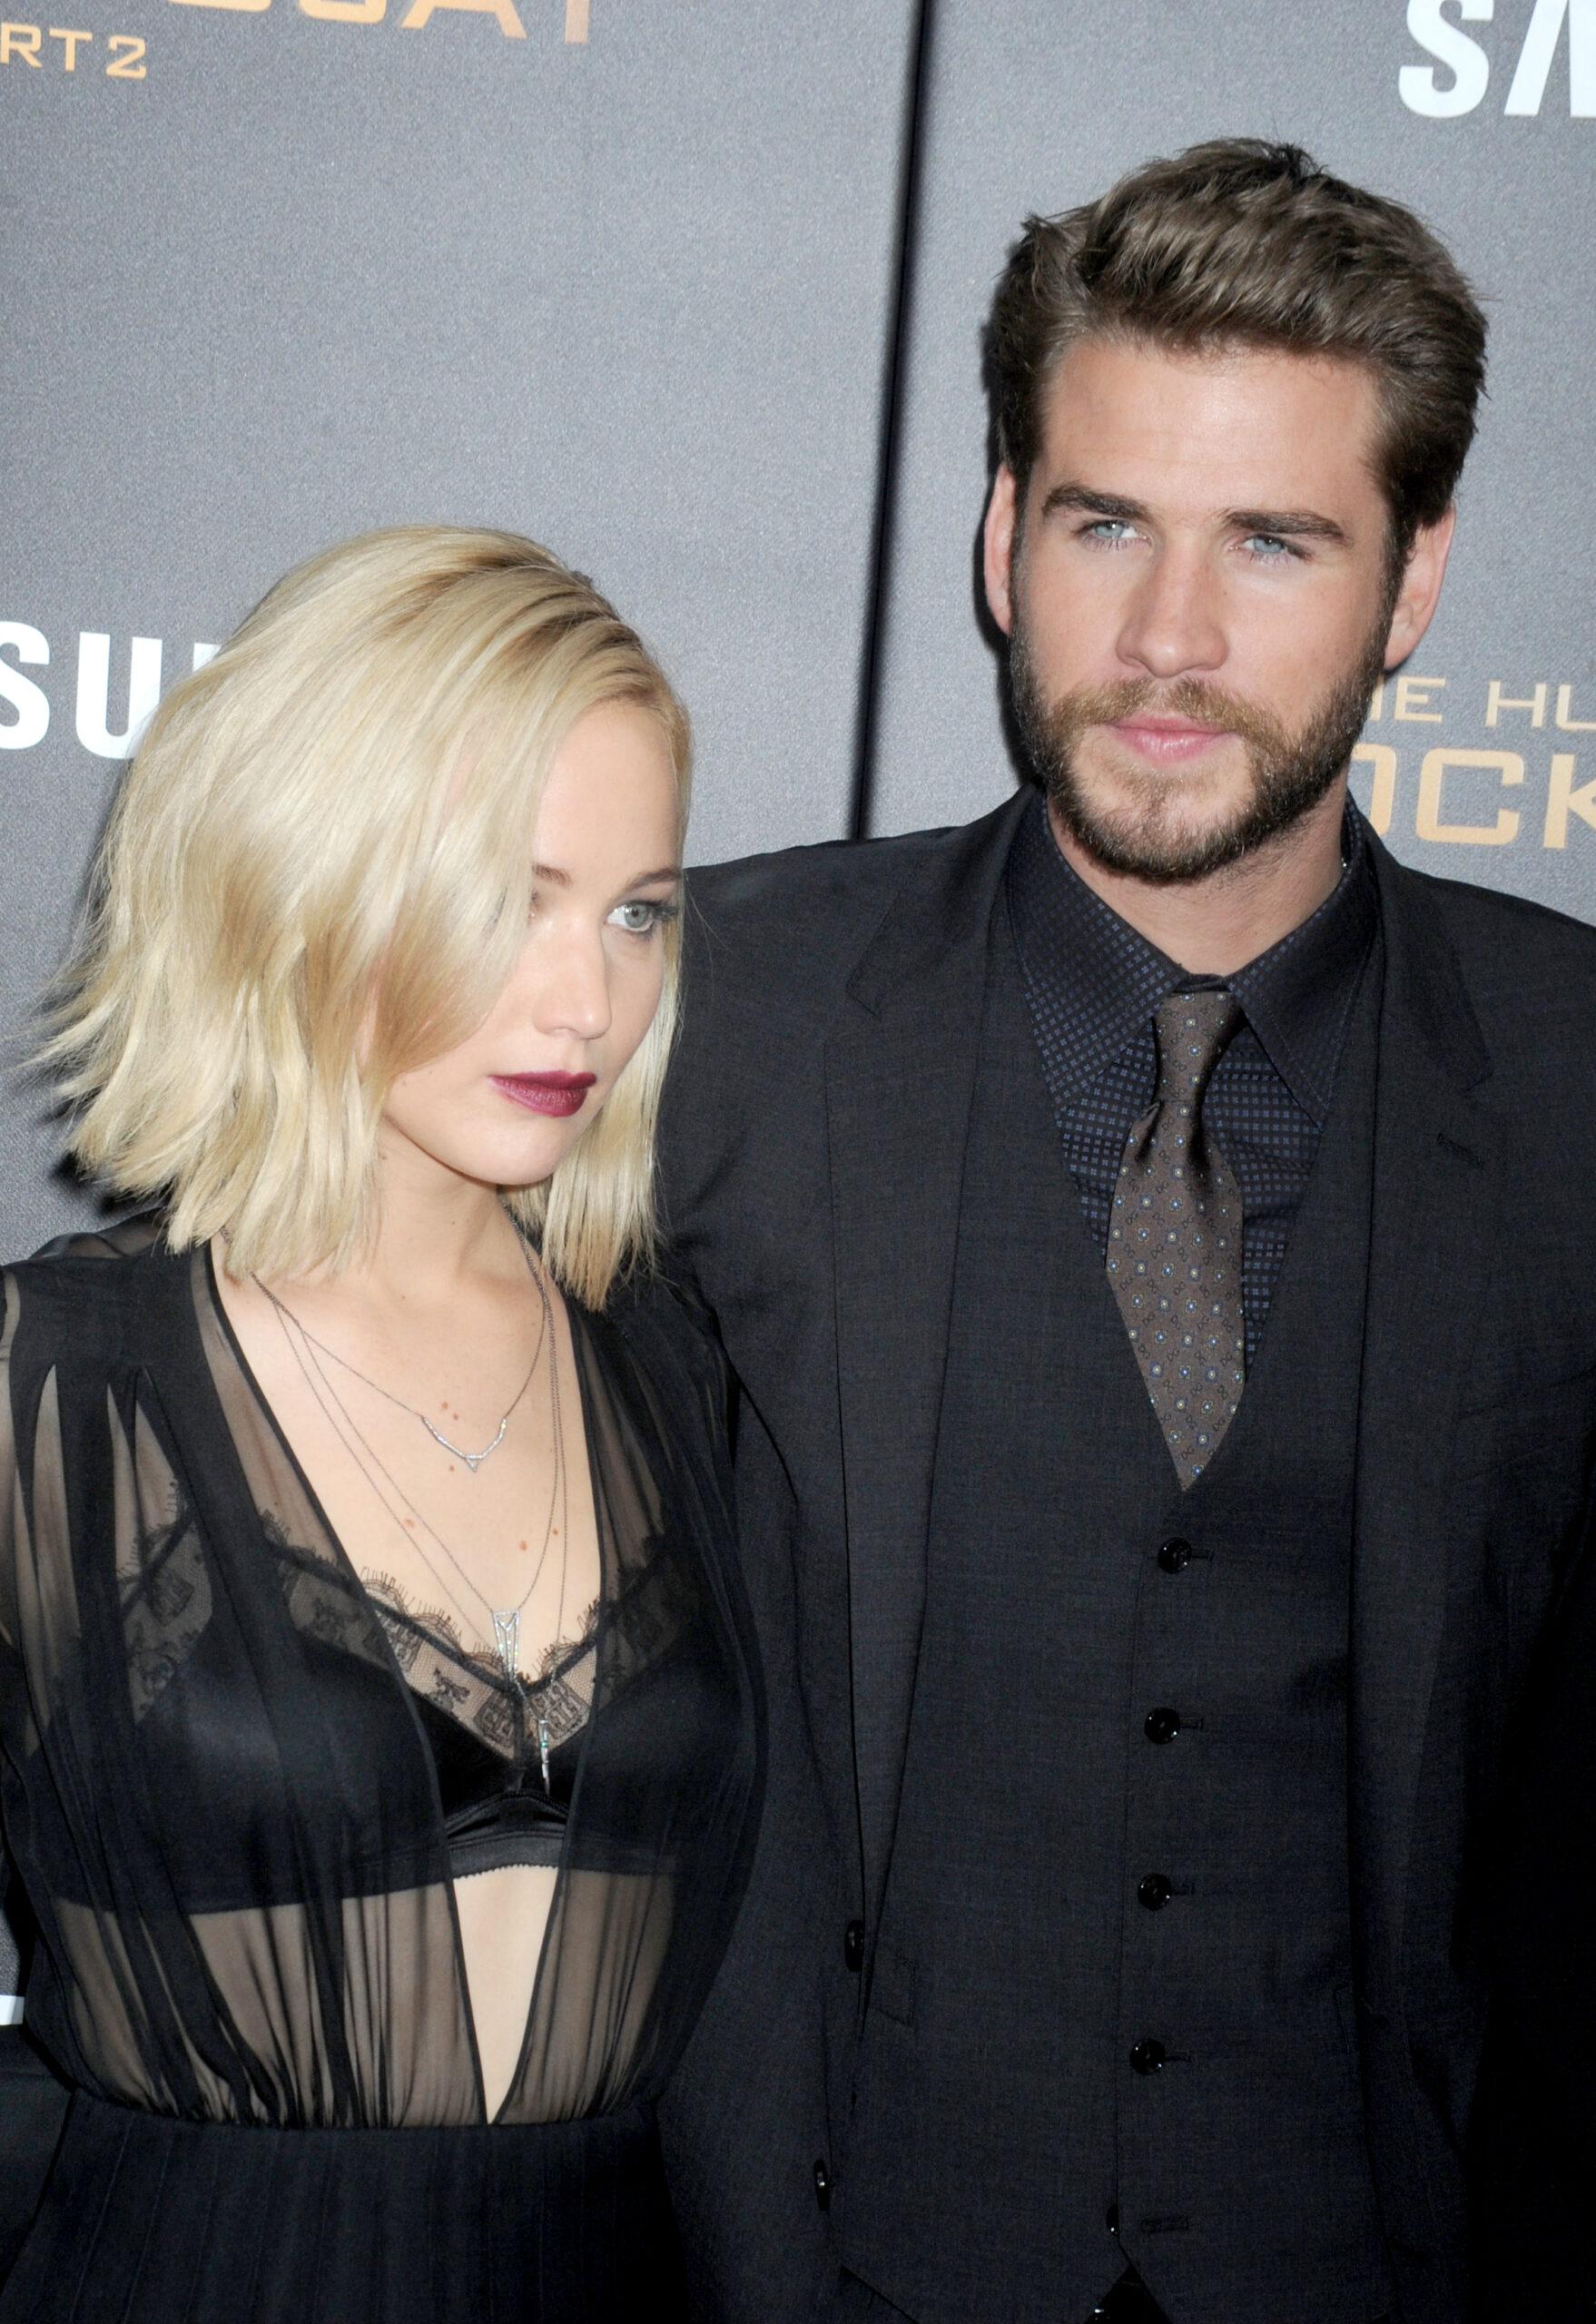 Jennifer Lawrence Dispels Rumored Affair With Liam Hemsworth While He Dated Miley Cyrus